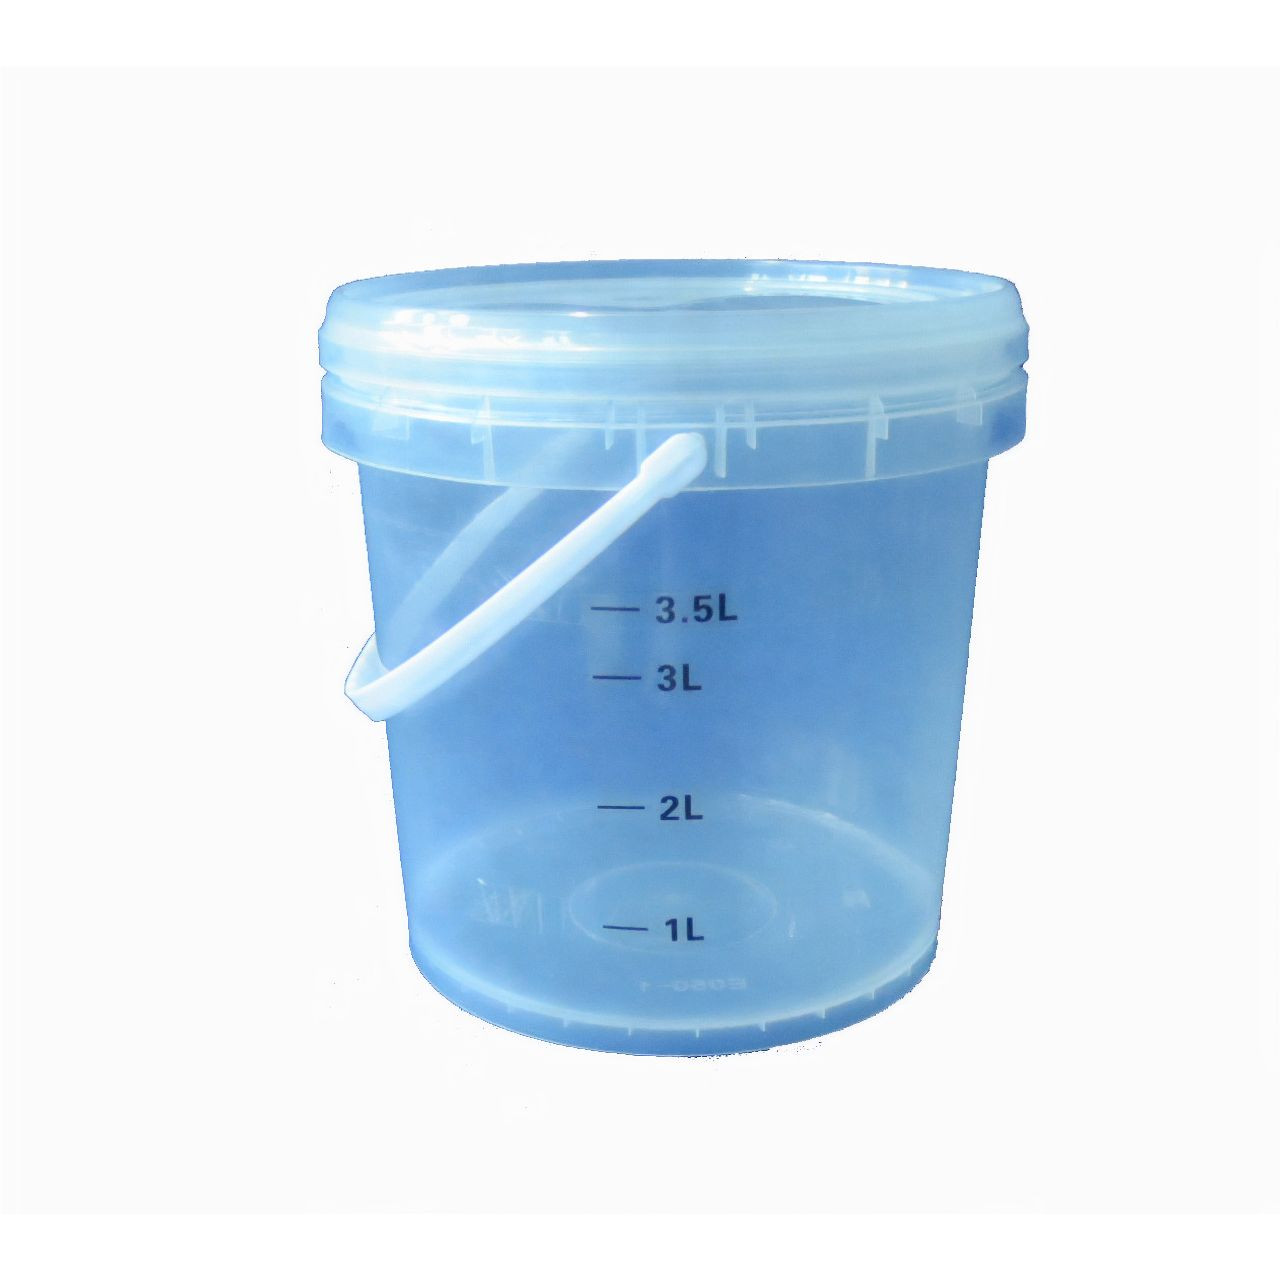 Clear Plastic Bucket 5L with Lid and Measurements